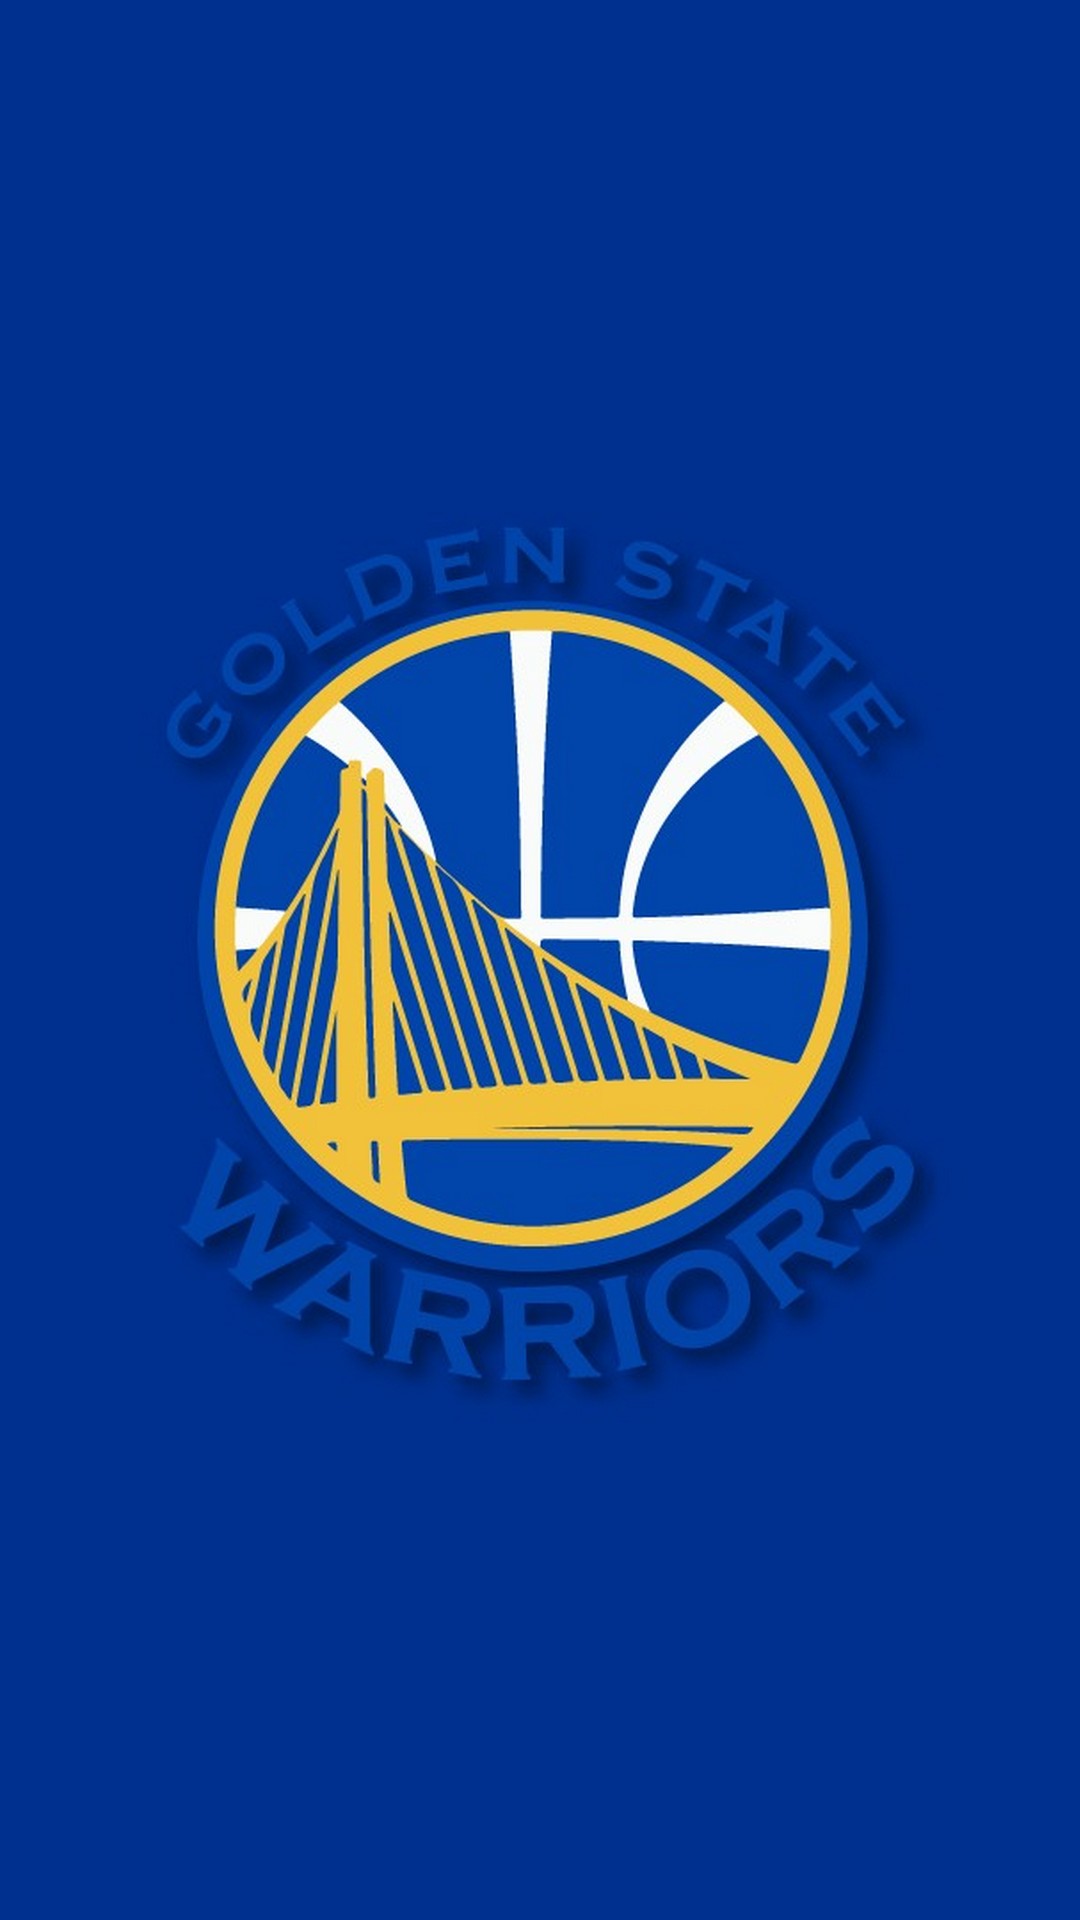 Golden State Warriors iPhone 7 Wallpaper with image dimensions 1080x1920 pixel. You can make this wallpaper for your Desktop Computer Backgrounds, Windows or Mac Screensavers, iPhone Lock screen, Tablet or Android and another Mobile Phone device